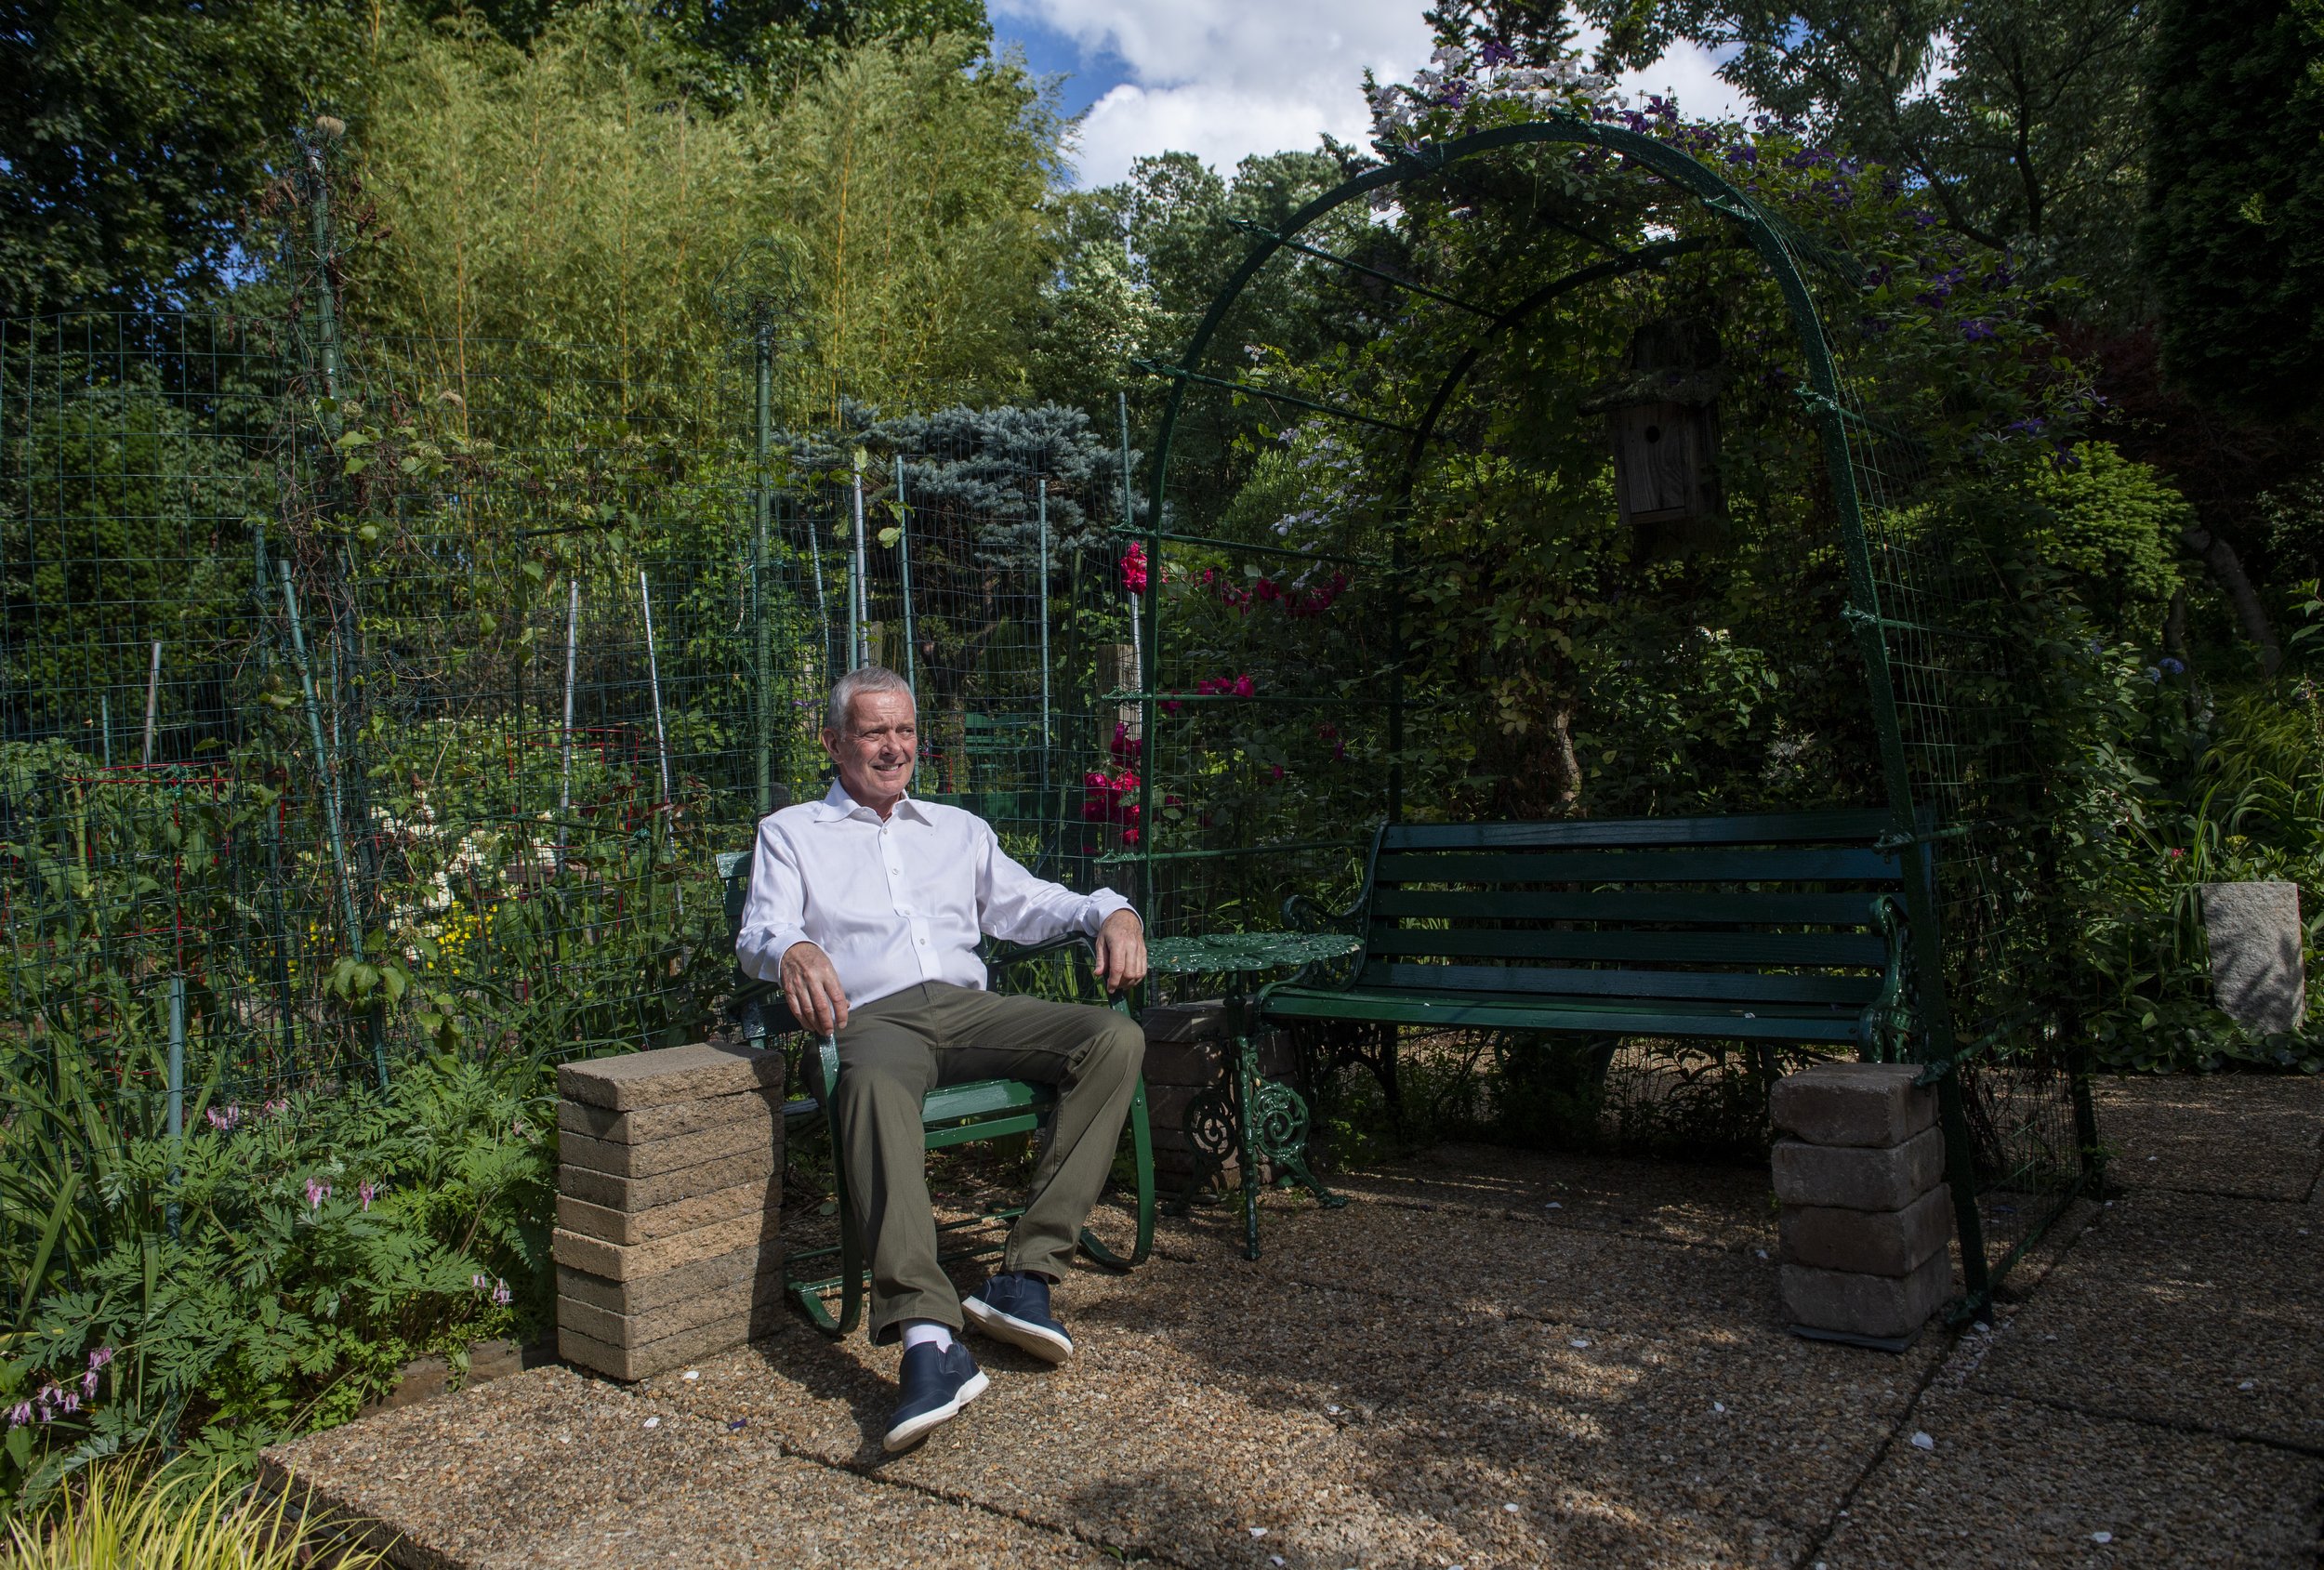  Mark Meaders sits in his garden on Tuesday, June 15, 2021, in Pittsburgh’s Squirrel Hill. Meaders' garden was one of 12 that was featured in the Symphony Splendor Garden Tour on June 27. (Emily Matthews/Post-Gazette) 